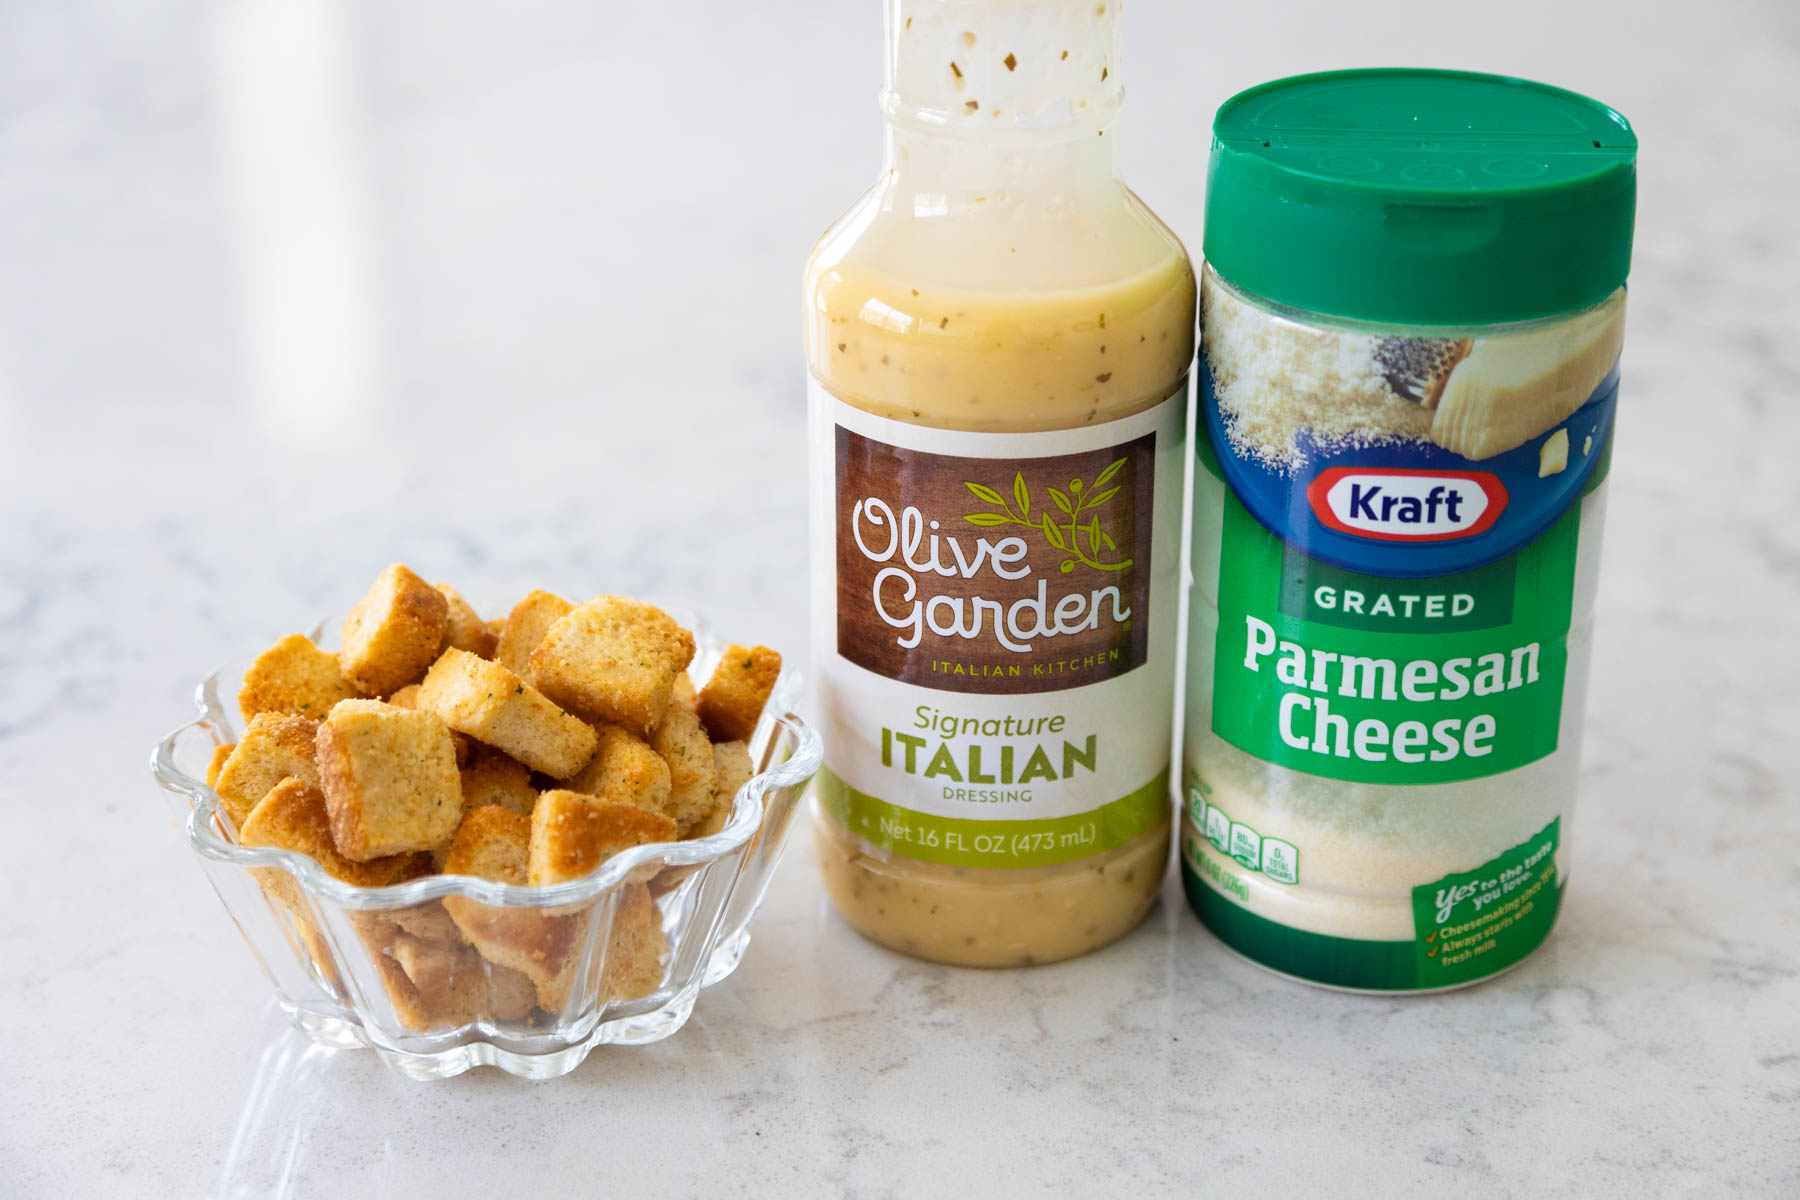 A bottle of Olive Garden Italian dressing sits next to a bowl of croutons and a jar of parmesan cheese.